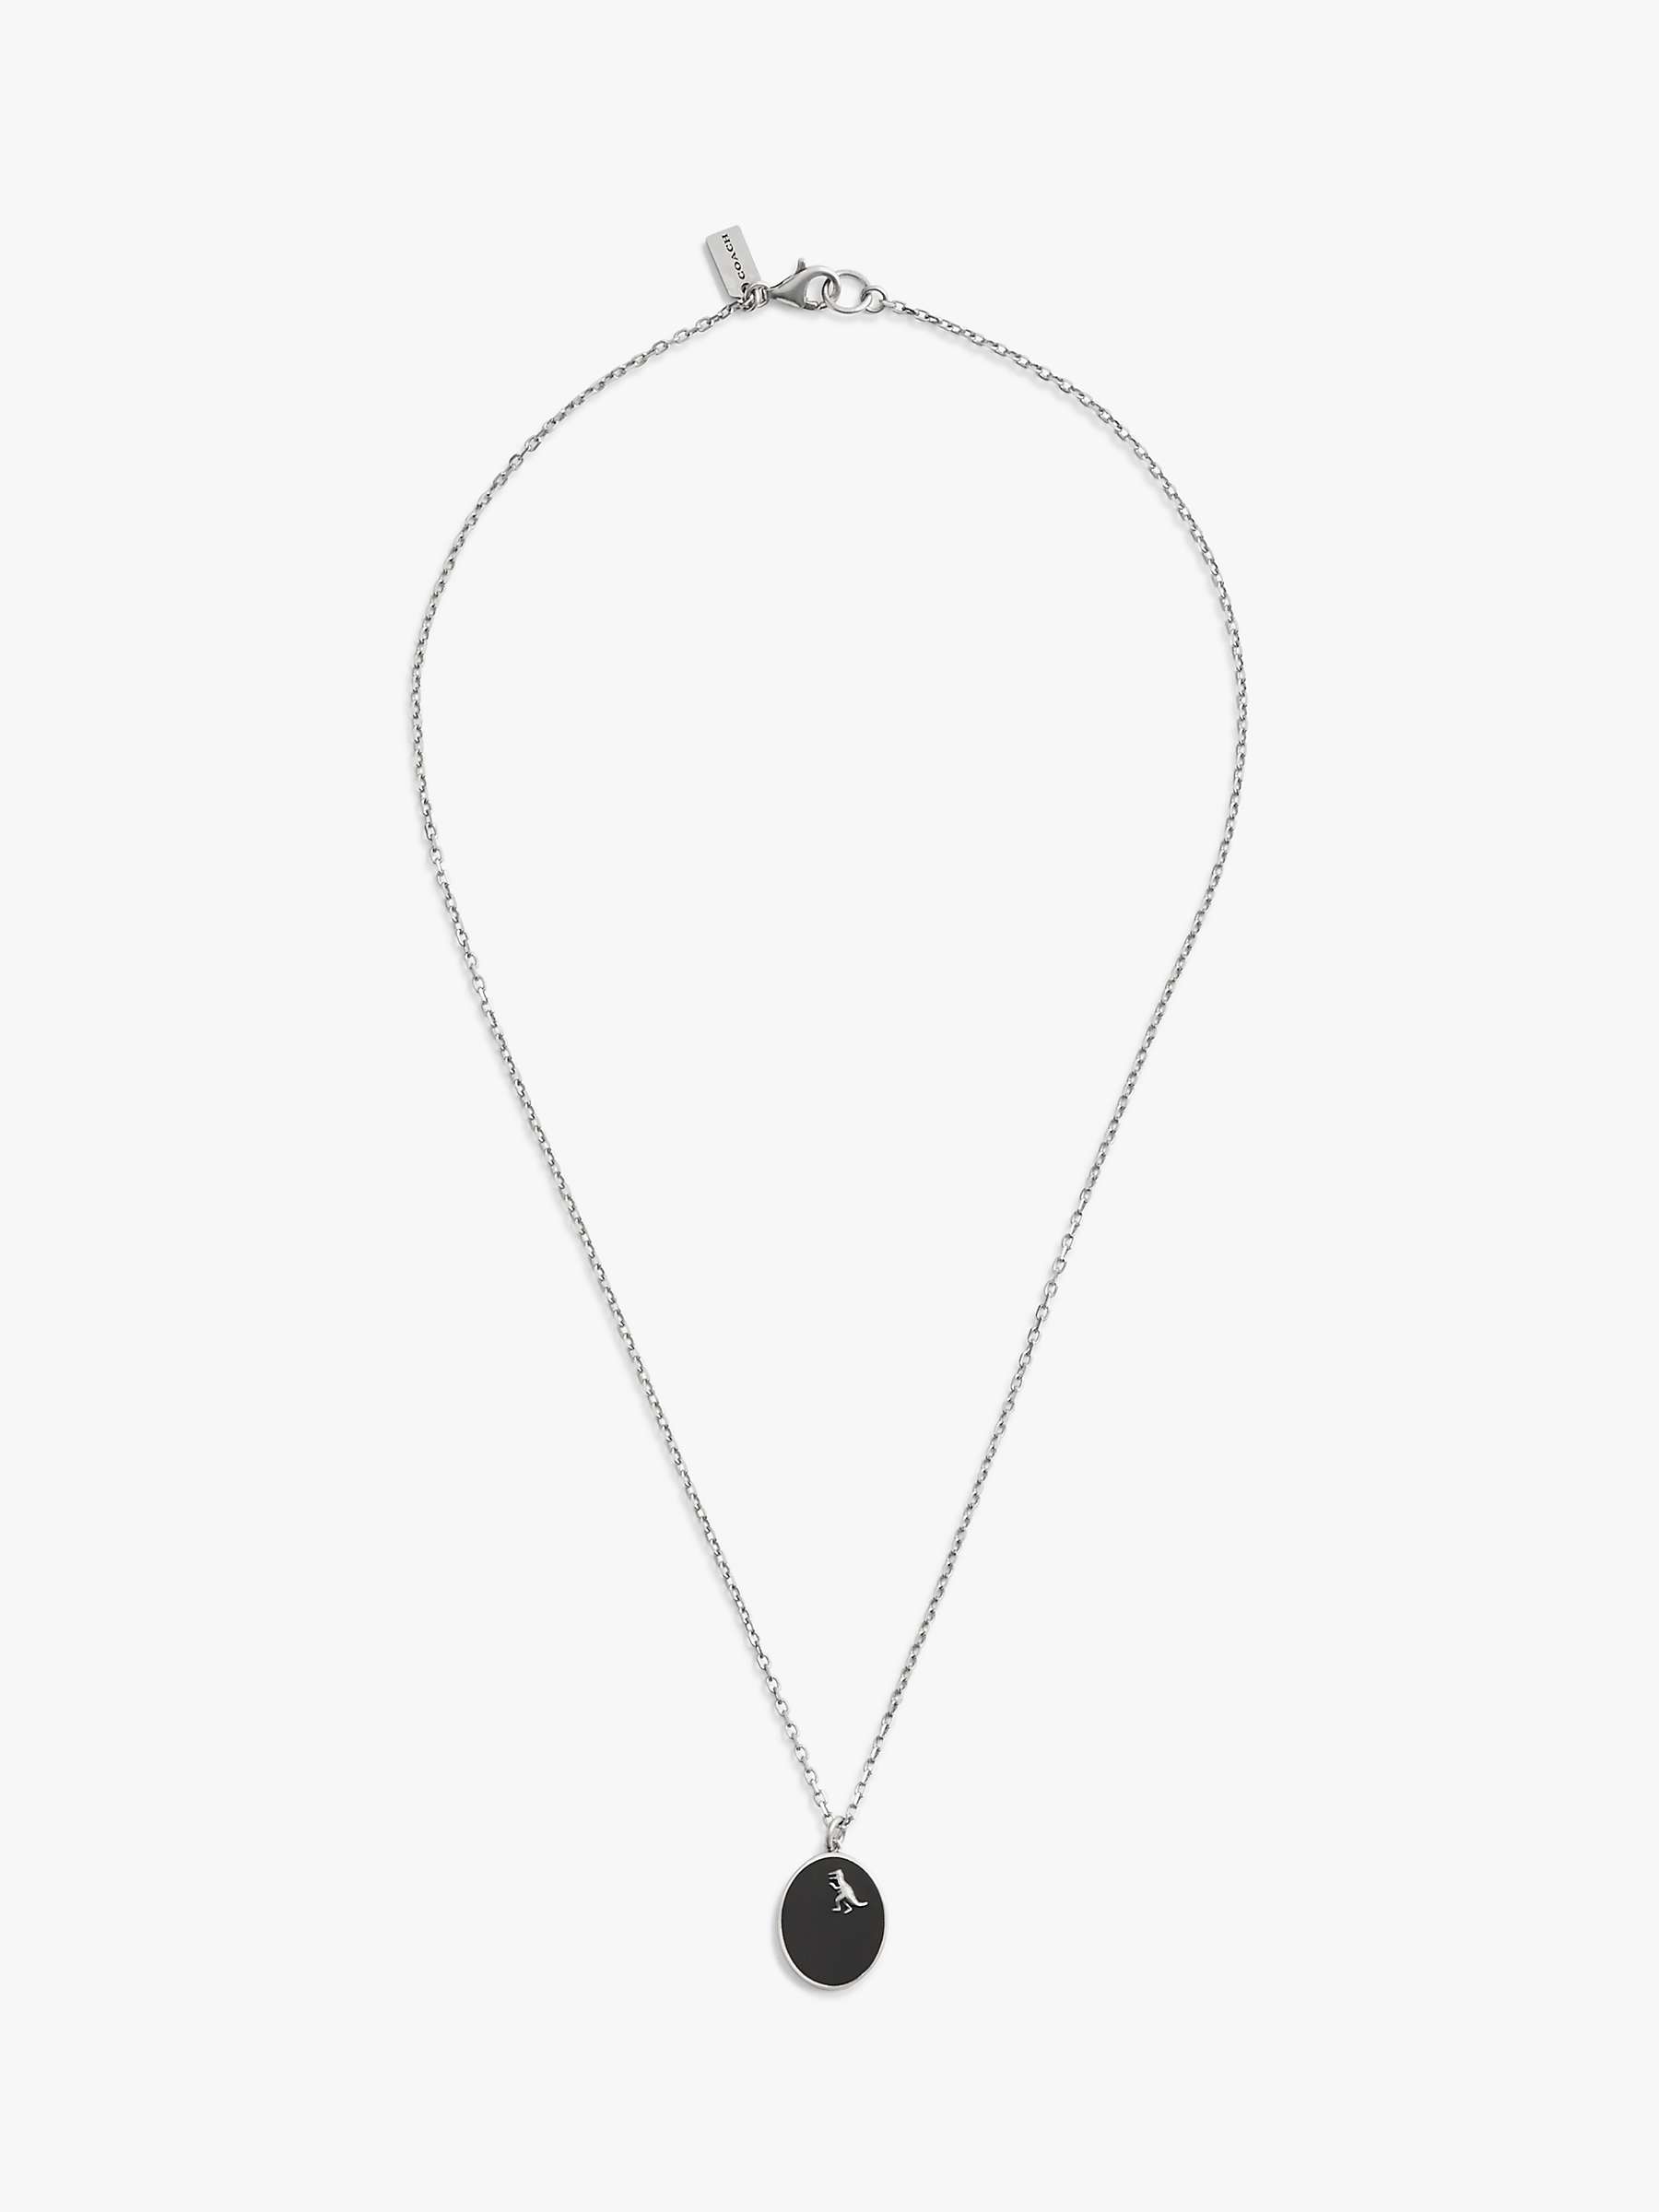 Buy Coach Rexy Dino Coin Pendant Necklace, Silver Online at johnlewis.com